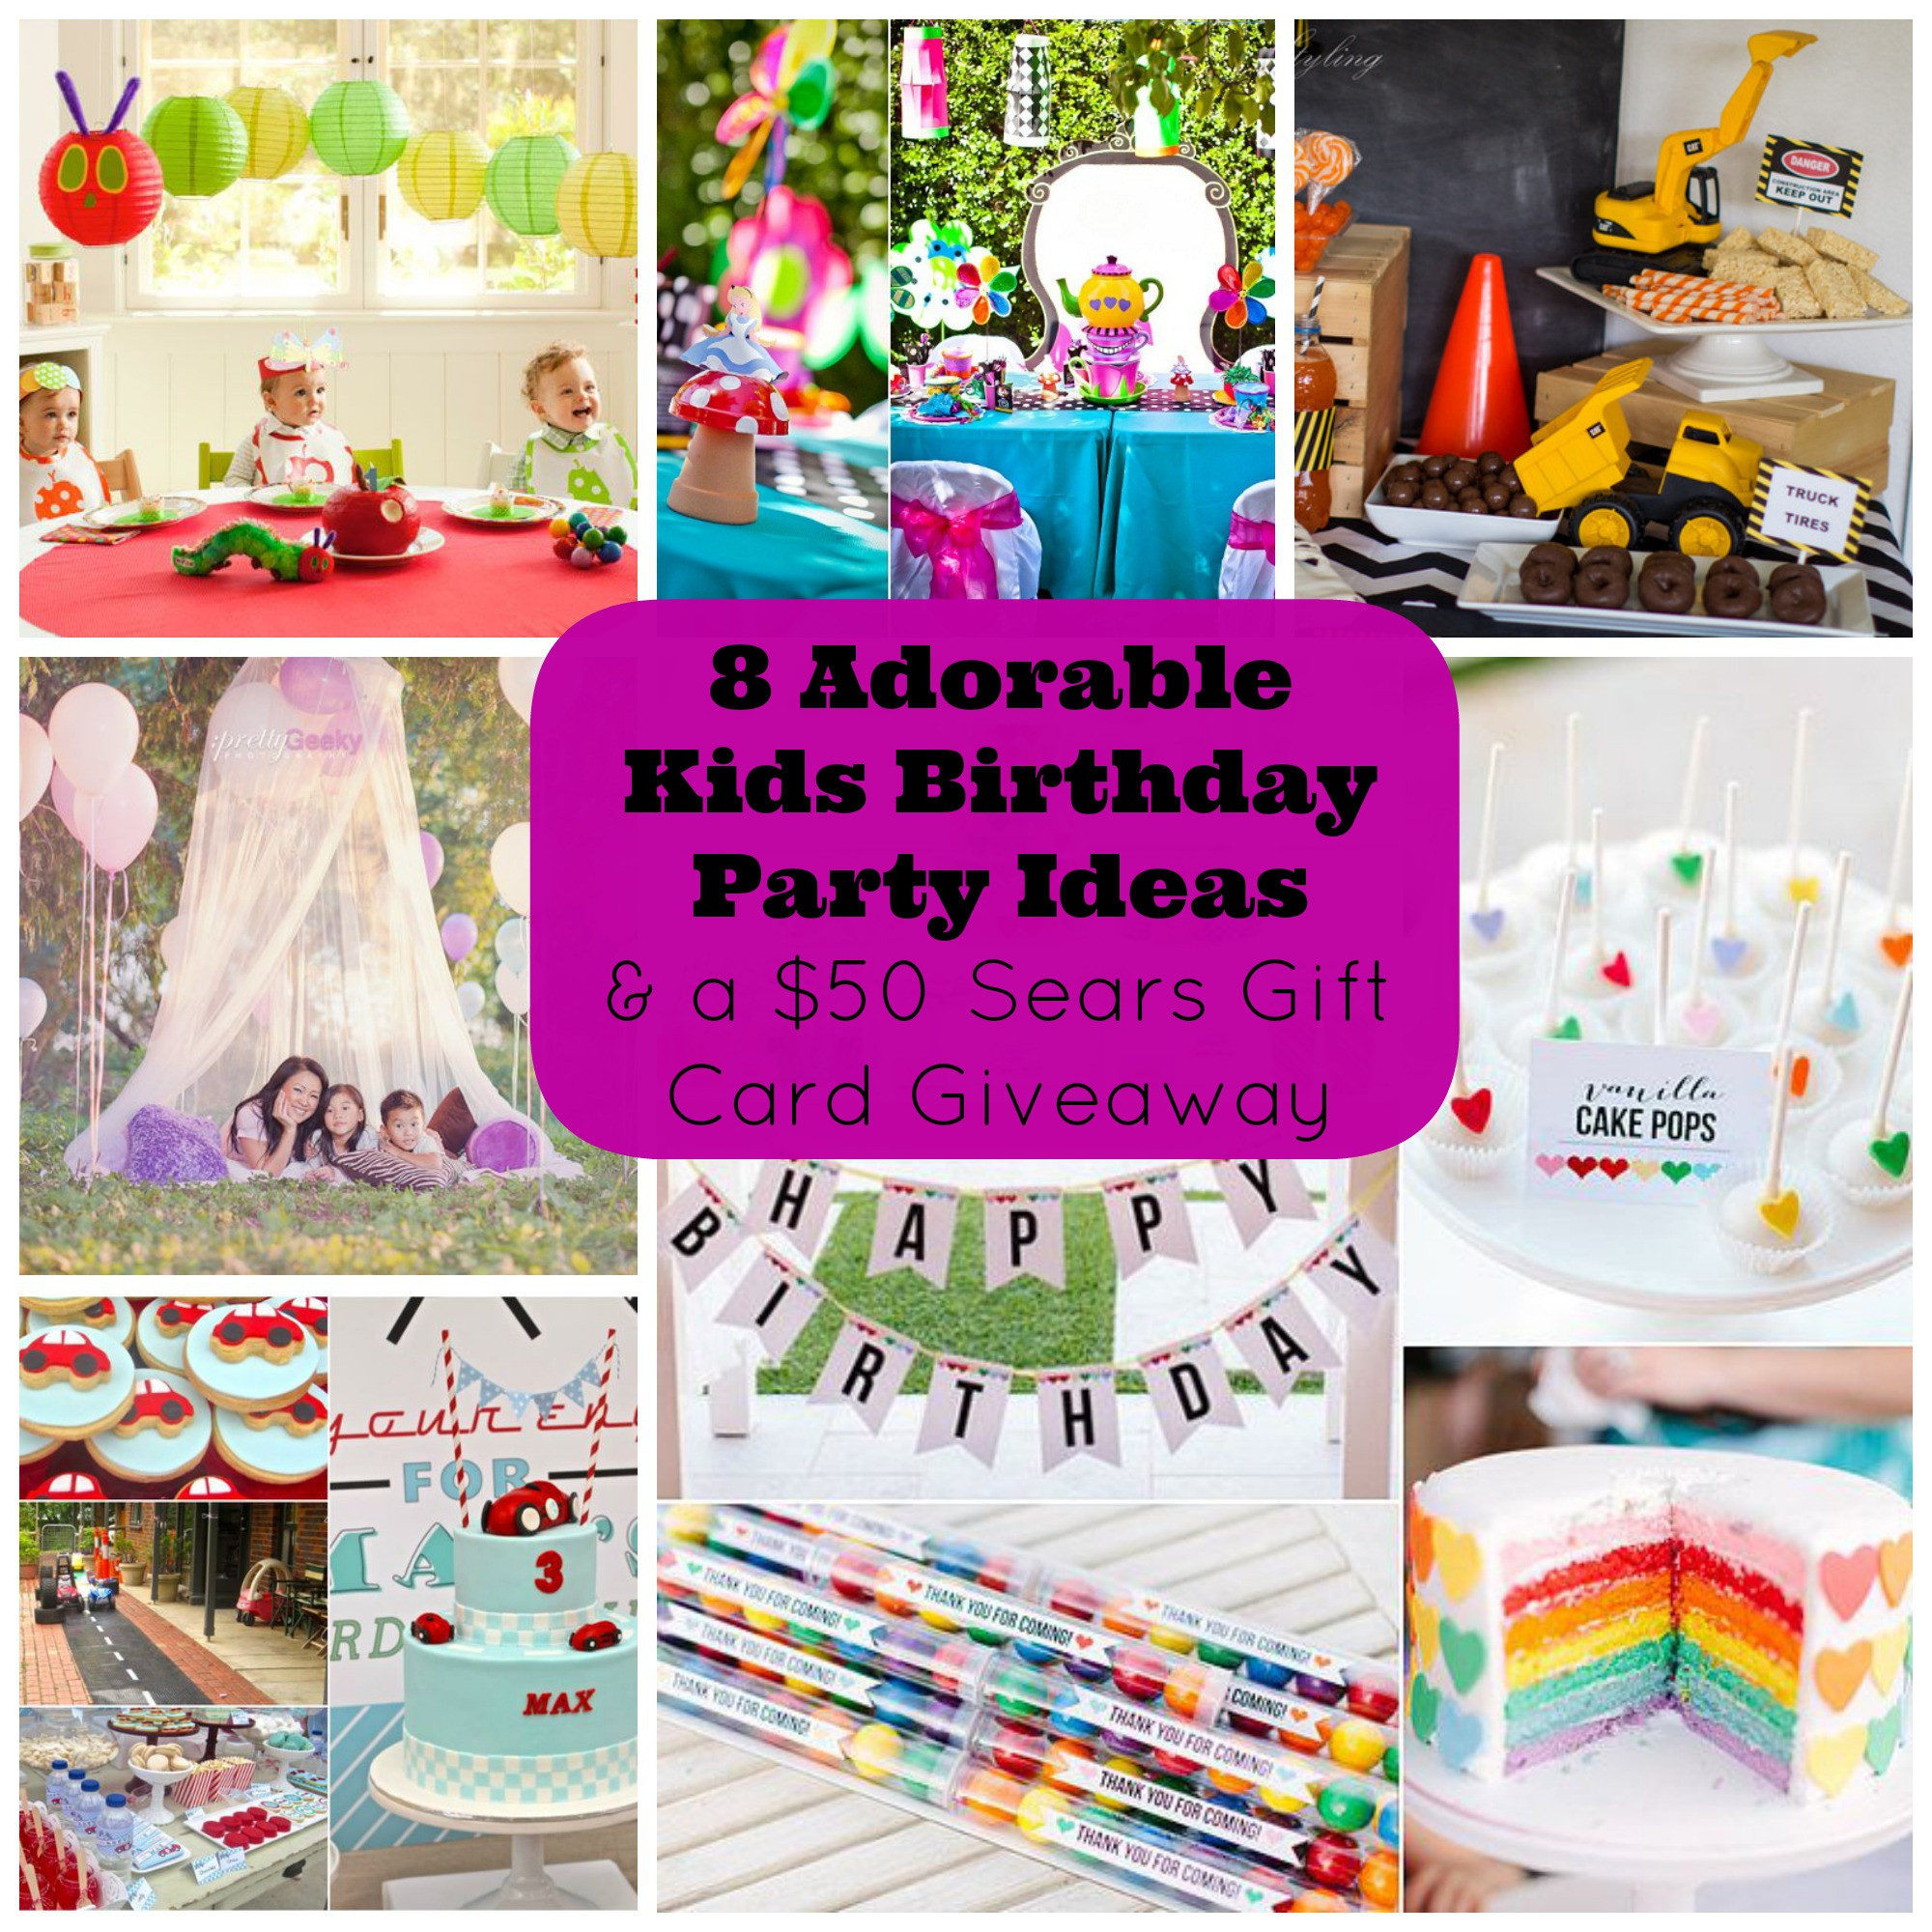 Unique Birthday Gifts For Kids
 8 Adorable Kids Birthday Party Ideas and a Giveaway for a